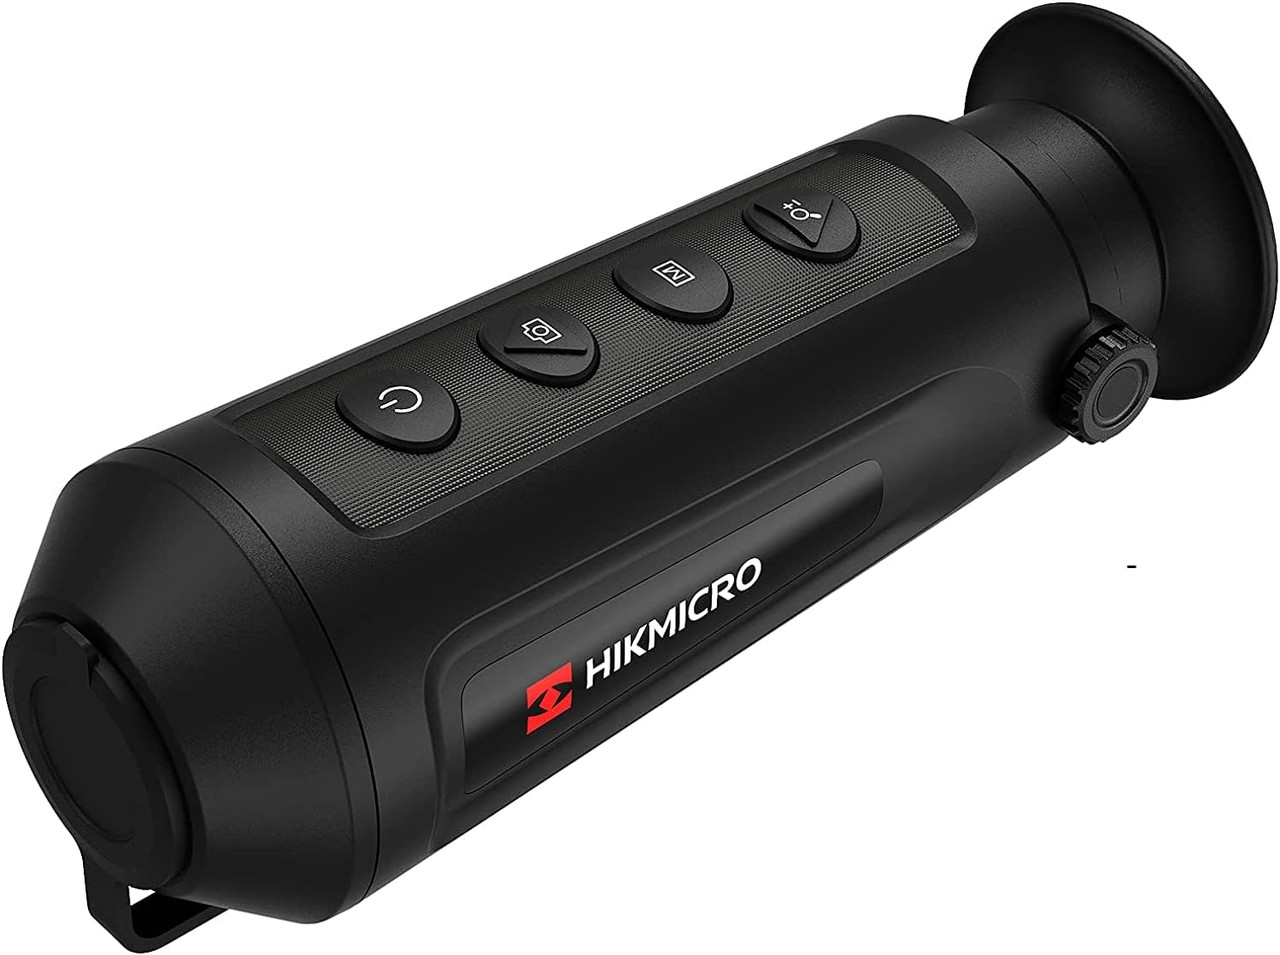 HIKMICRO Thermal Camera Night Vision Scope LYNX LC06 Small Lightweight Infrared Thermal Monocular 219m Detectable HIK0001 Black